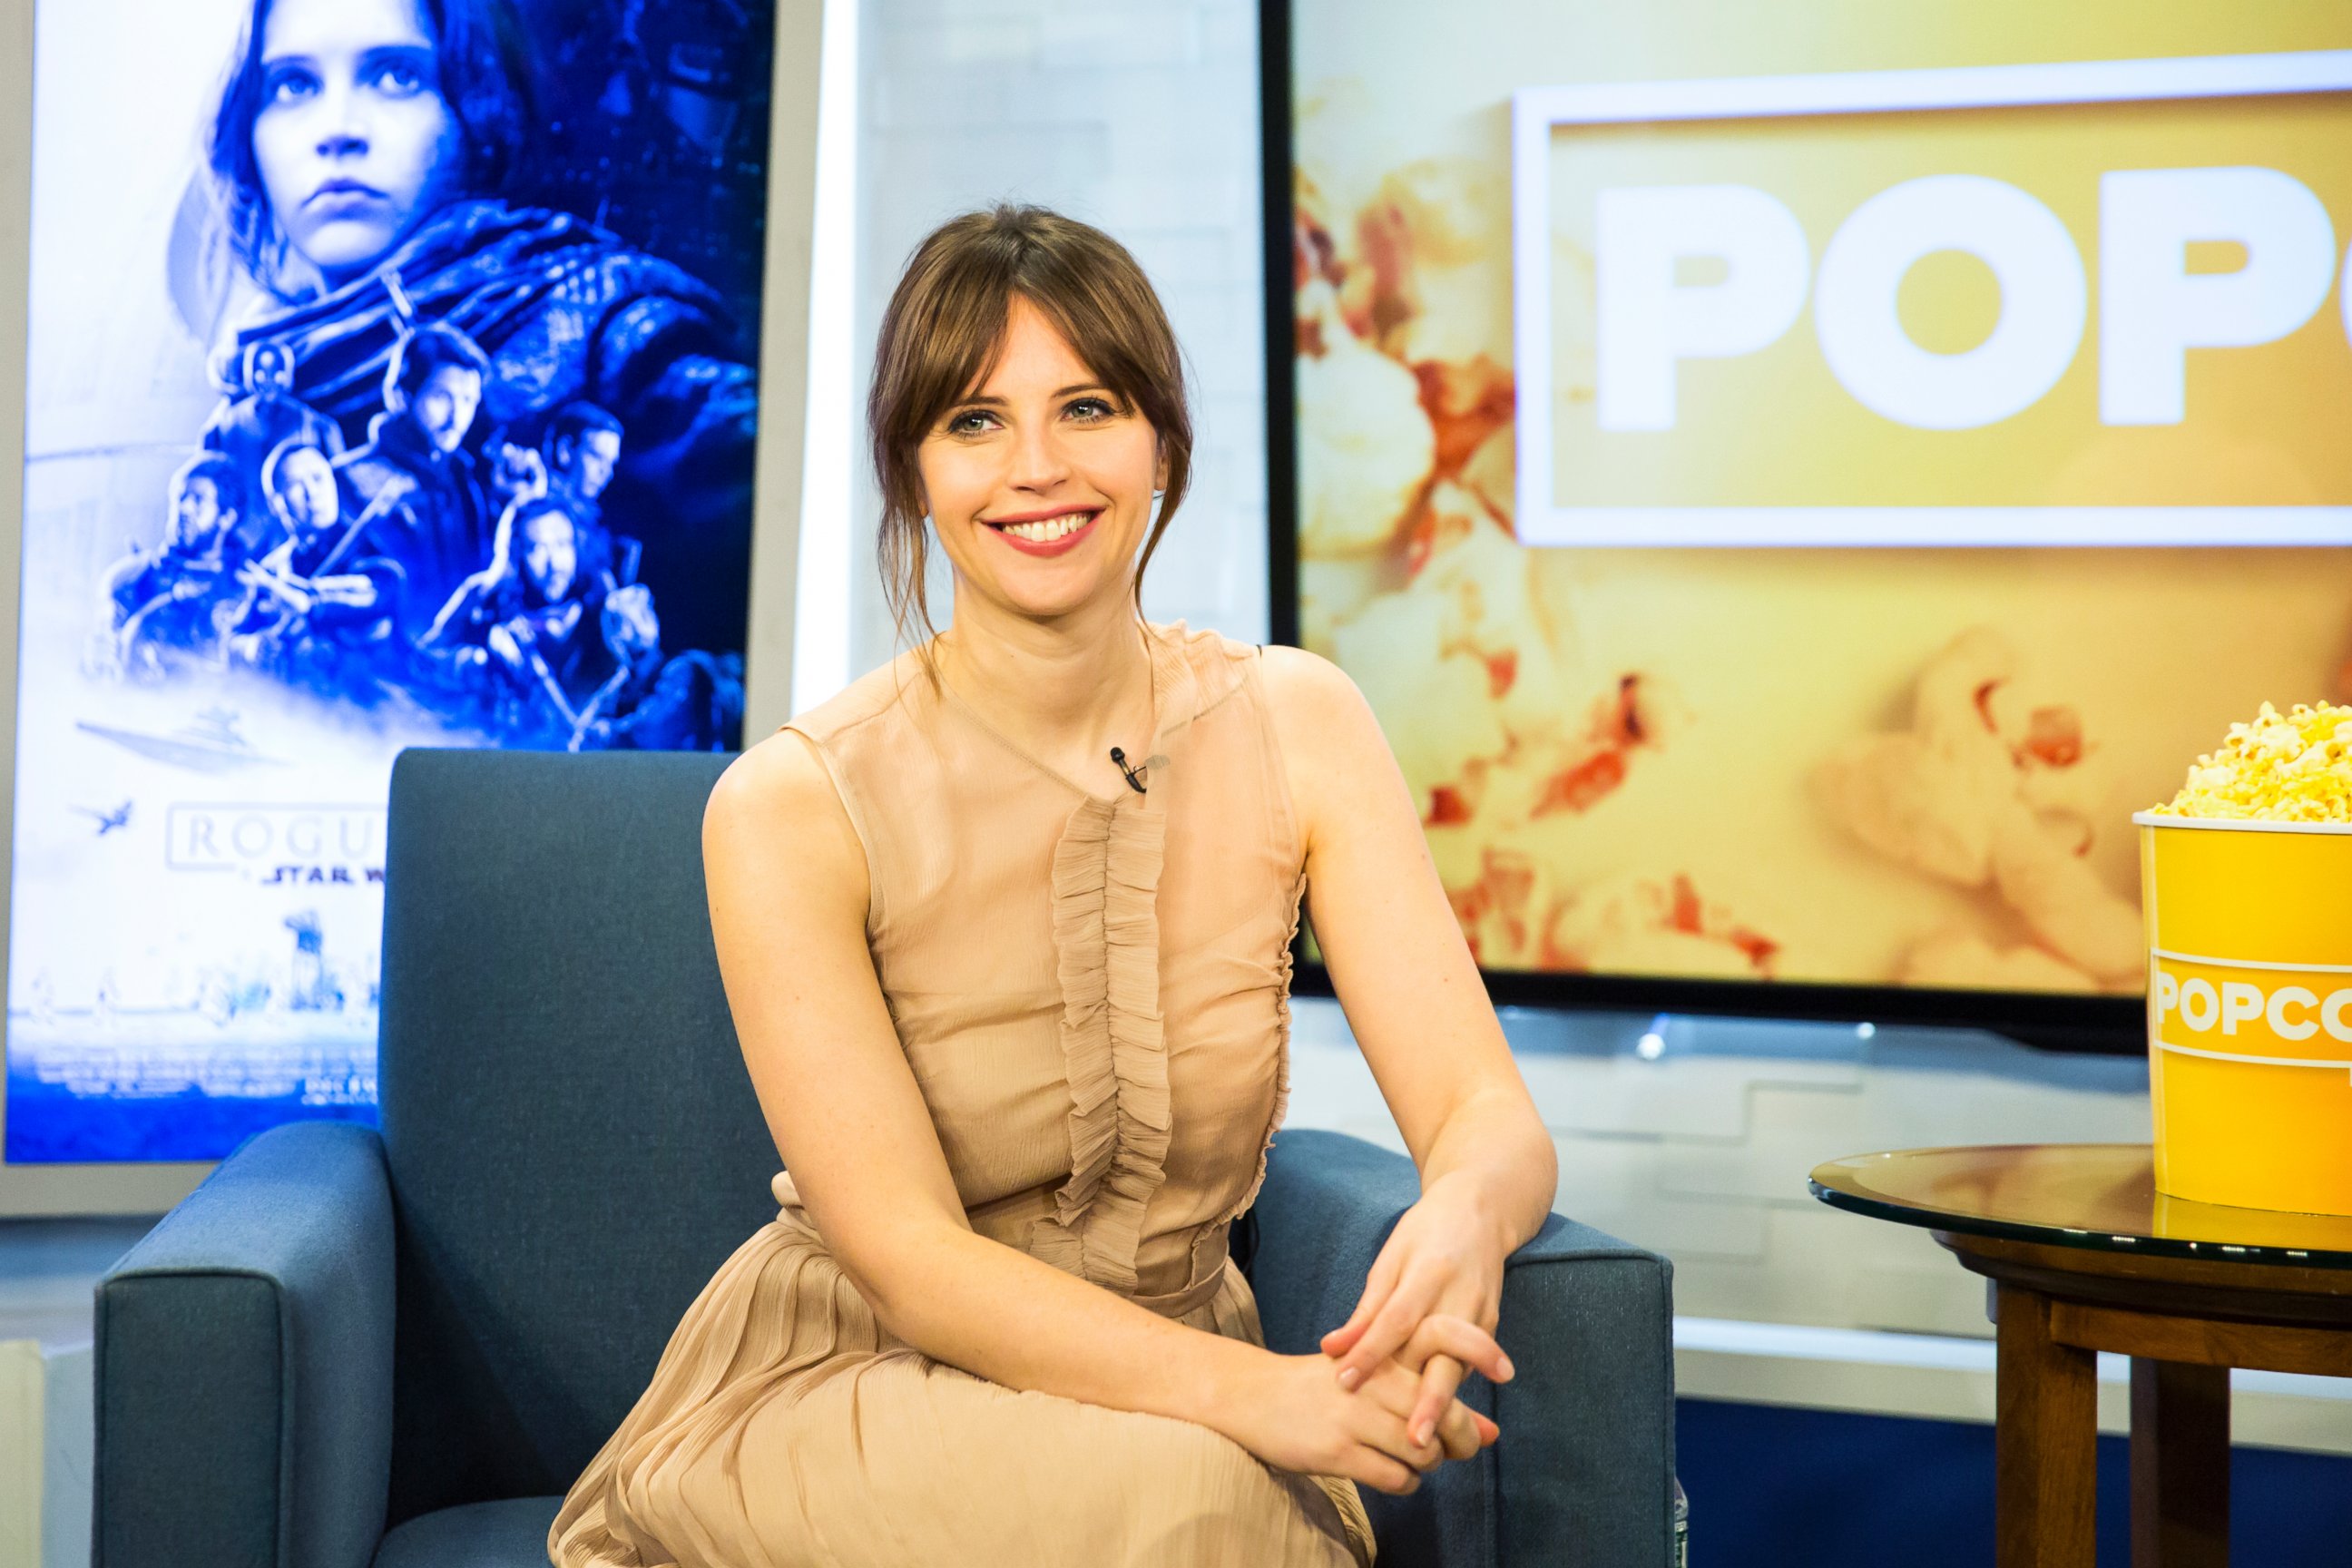 PHOTO: Felicity Jones appears here on "Popcorn With Peter Travers."